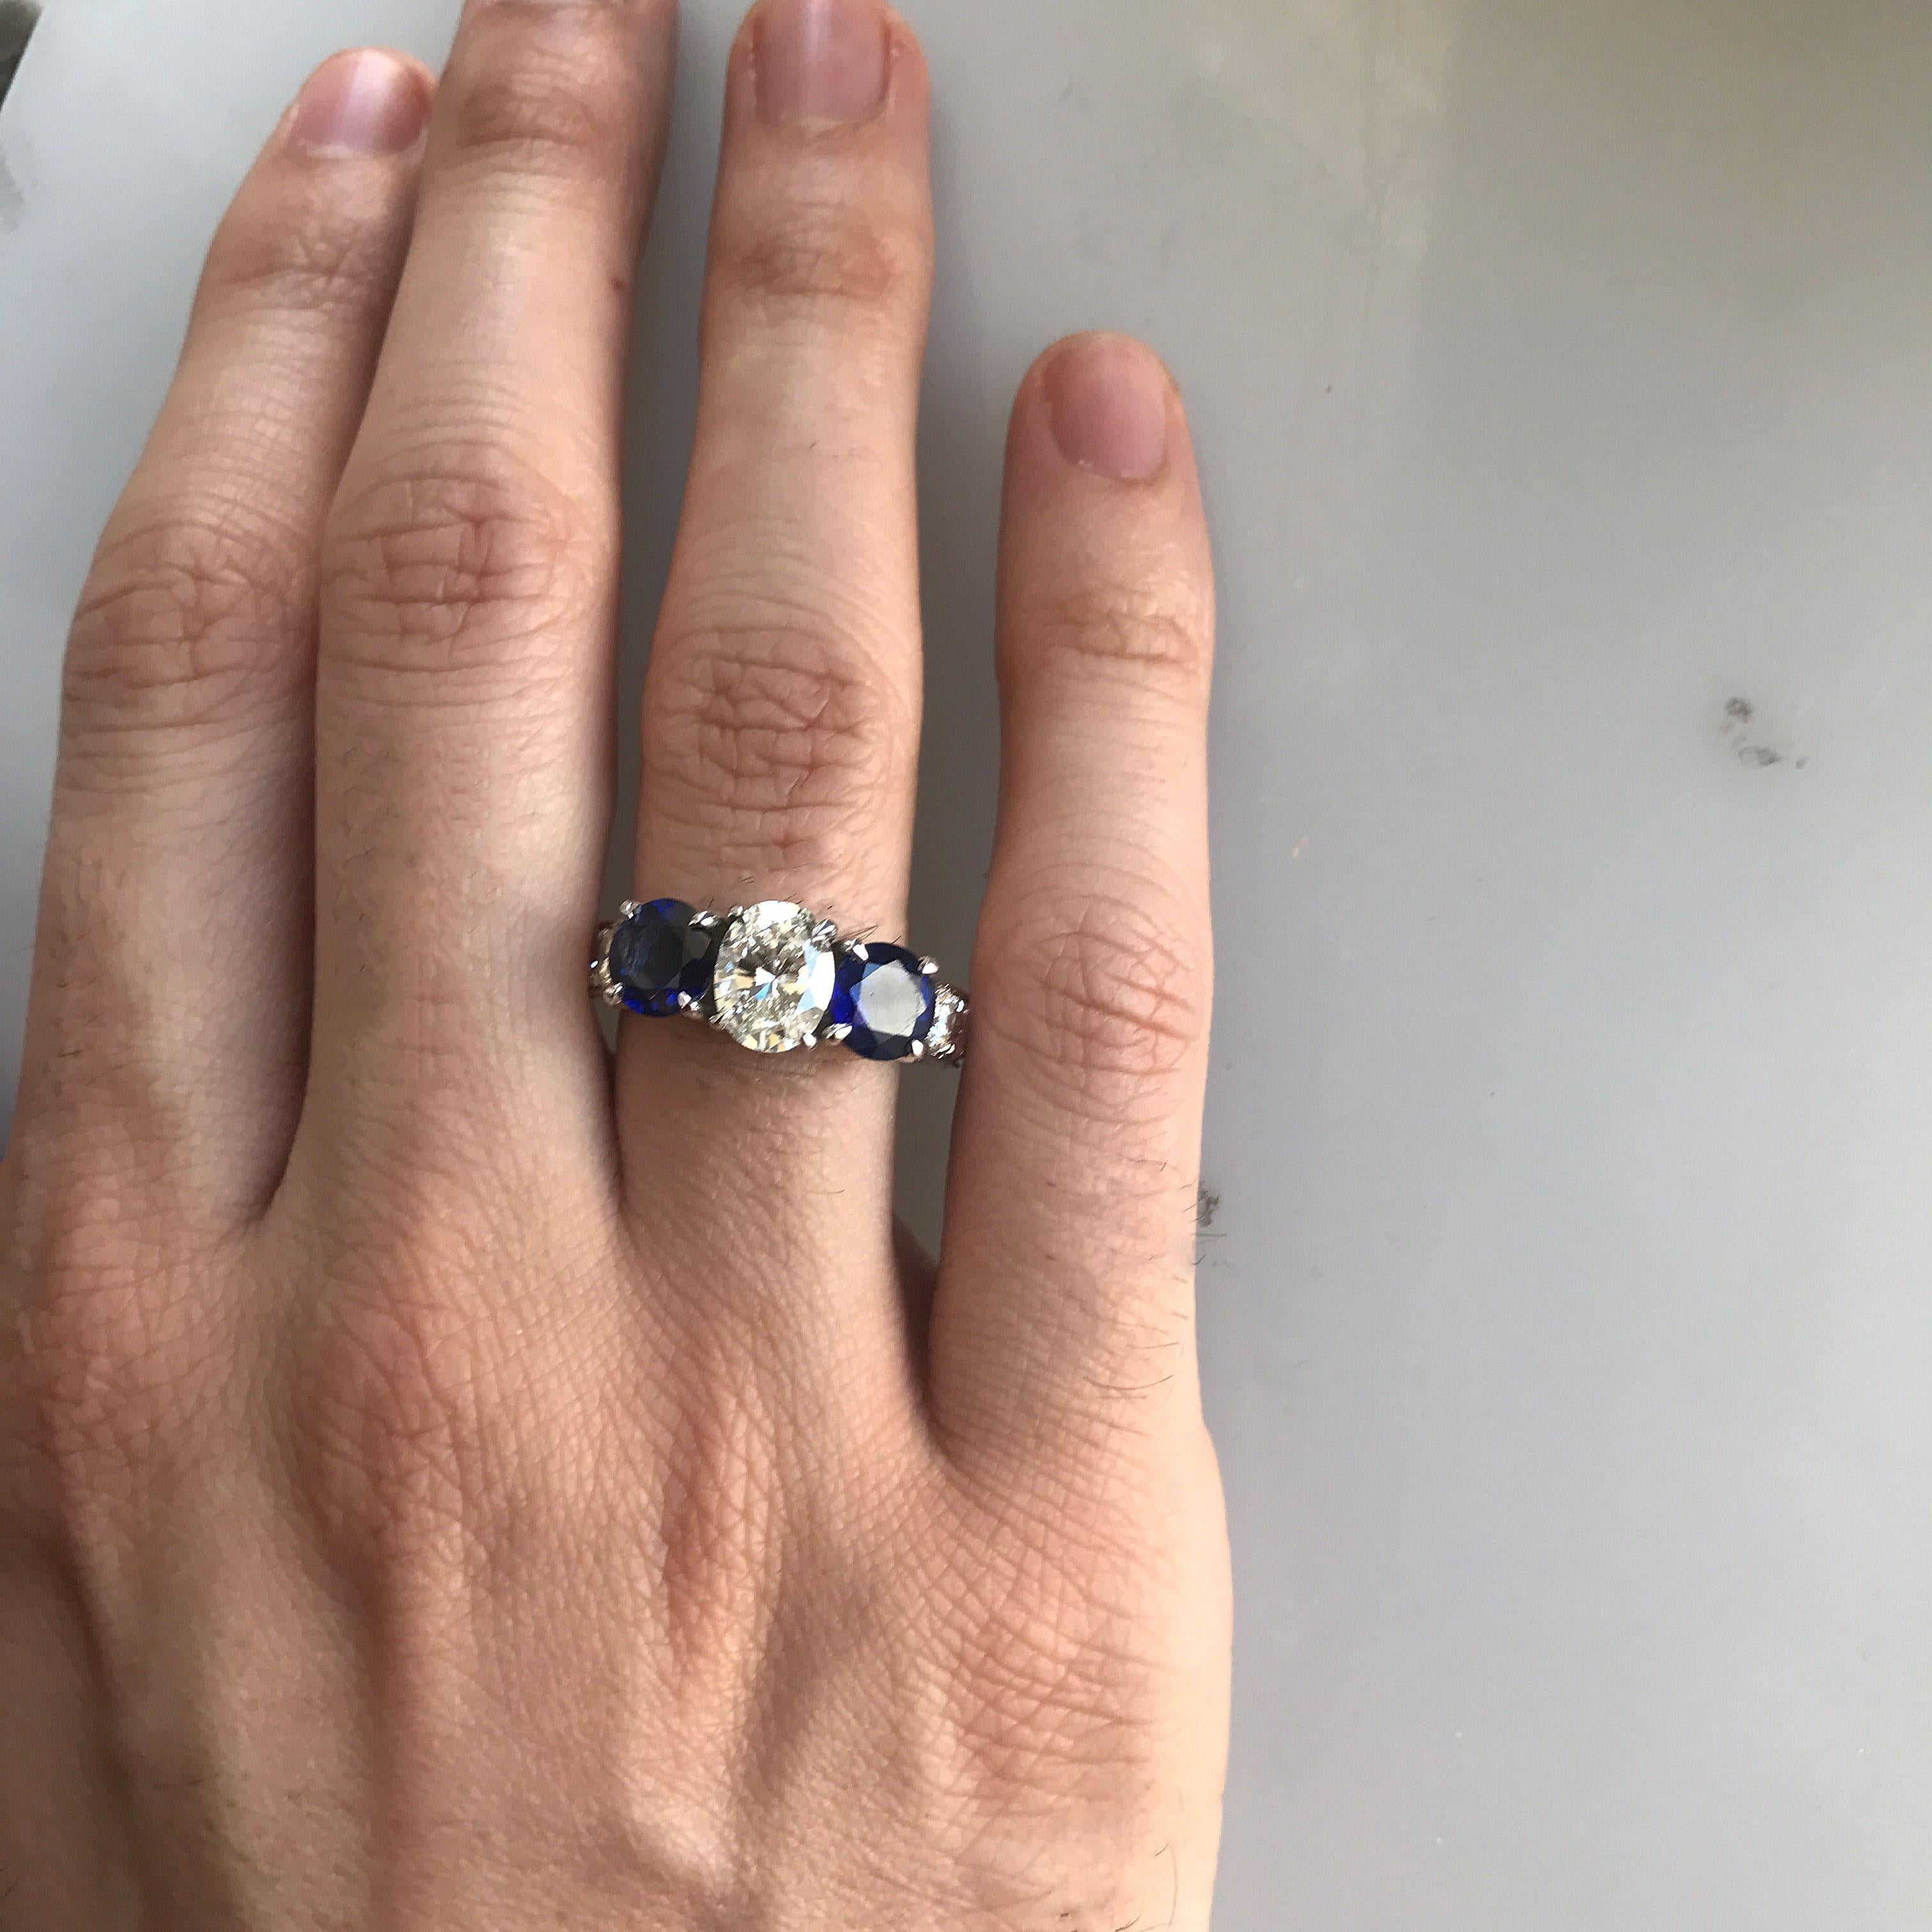 Can be sized to any finger size, ring will be made to order and take approximately  3- 6 business weeks. If you need a sooner date let us know and we will see if we can accommodate you.

Price is for ring as shown, you can adjust size of stones or